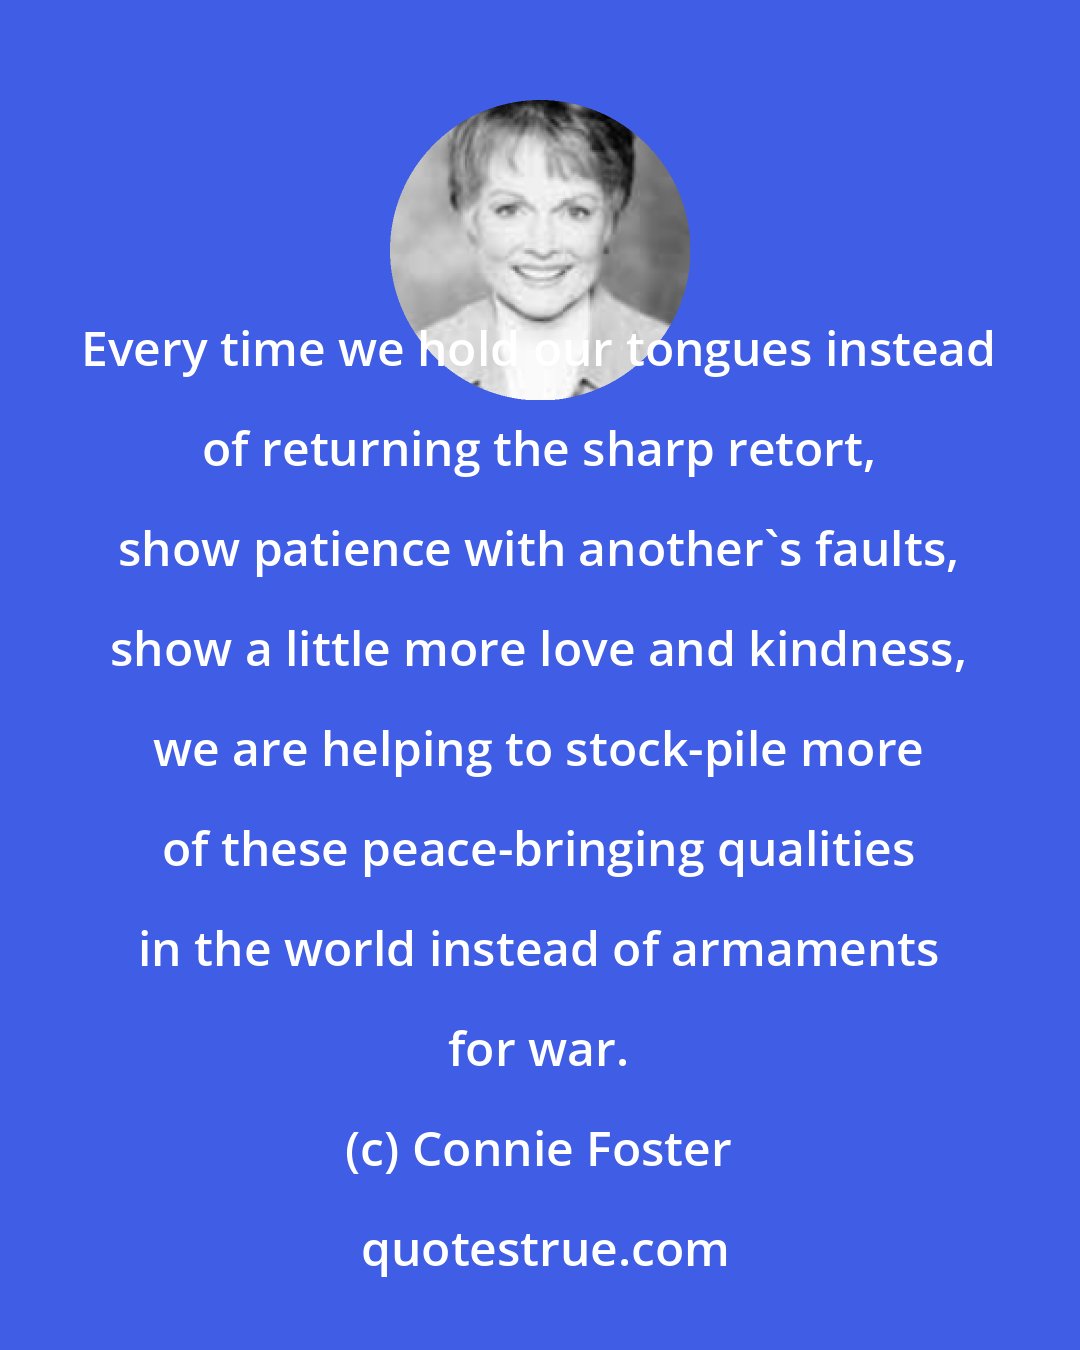 Connie Foster: Every time we hold our tongues instead of returning the sharp retort, show patience with another's faults, show a little more love and kindness, we are helping to stock-pile more of these peace-bringing qualities in the world instead of armaments for war.